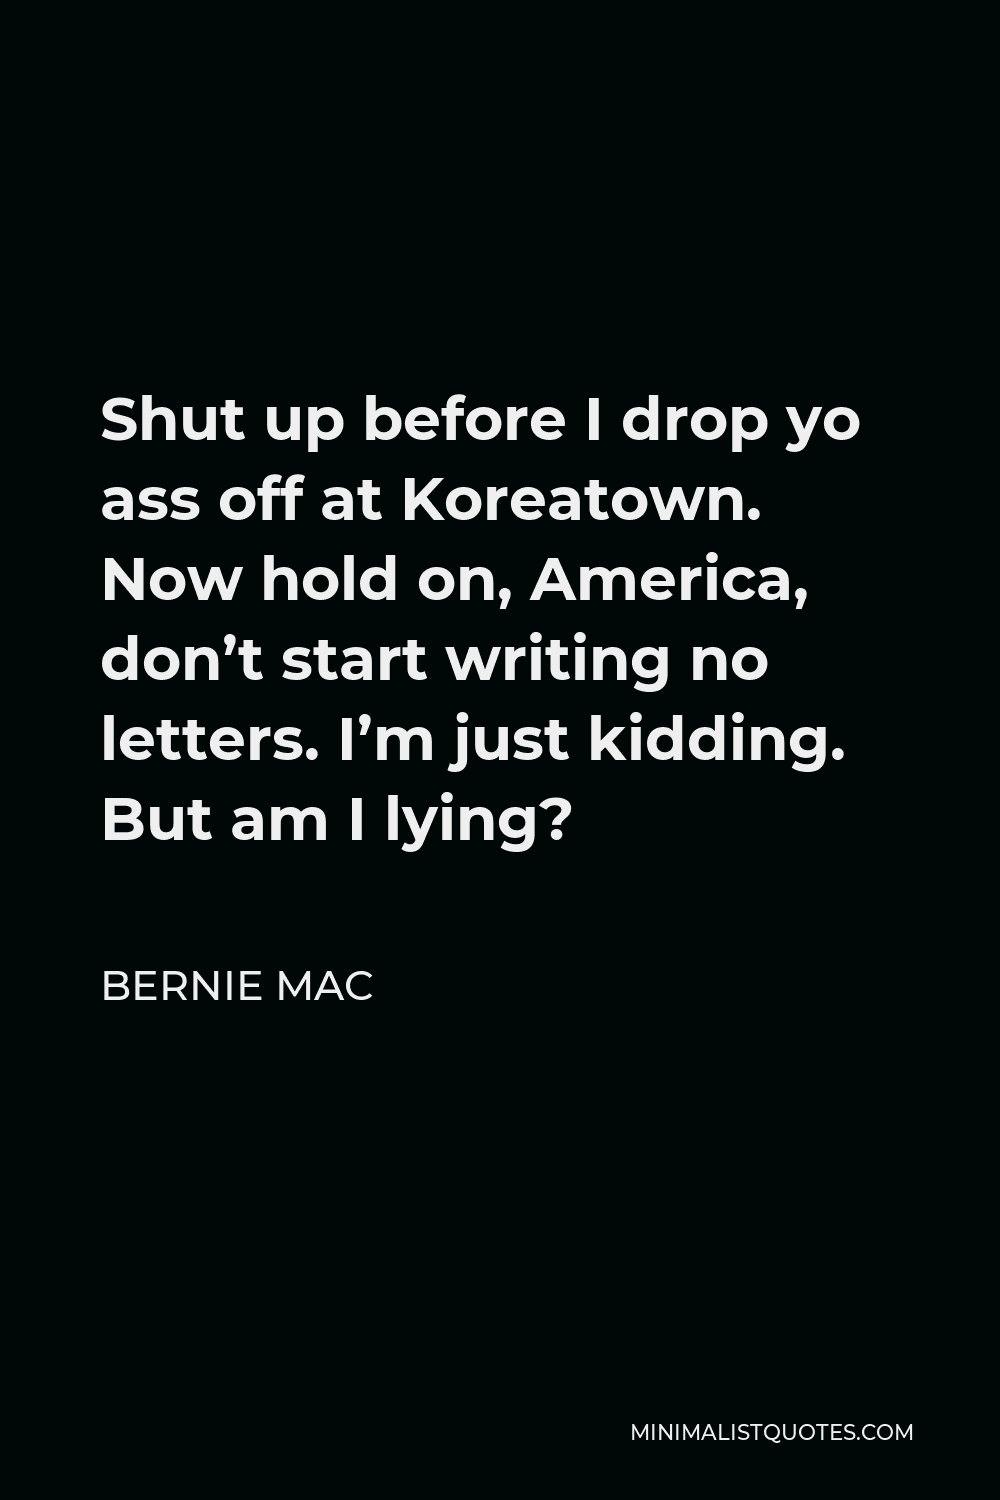 Bernie Mac Quote - Shut up before I drop yo ass off at Koreatown. Now hold on, America, don’t start writing no letters. I’m just kidding. But am I lying?